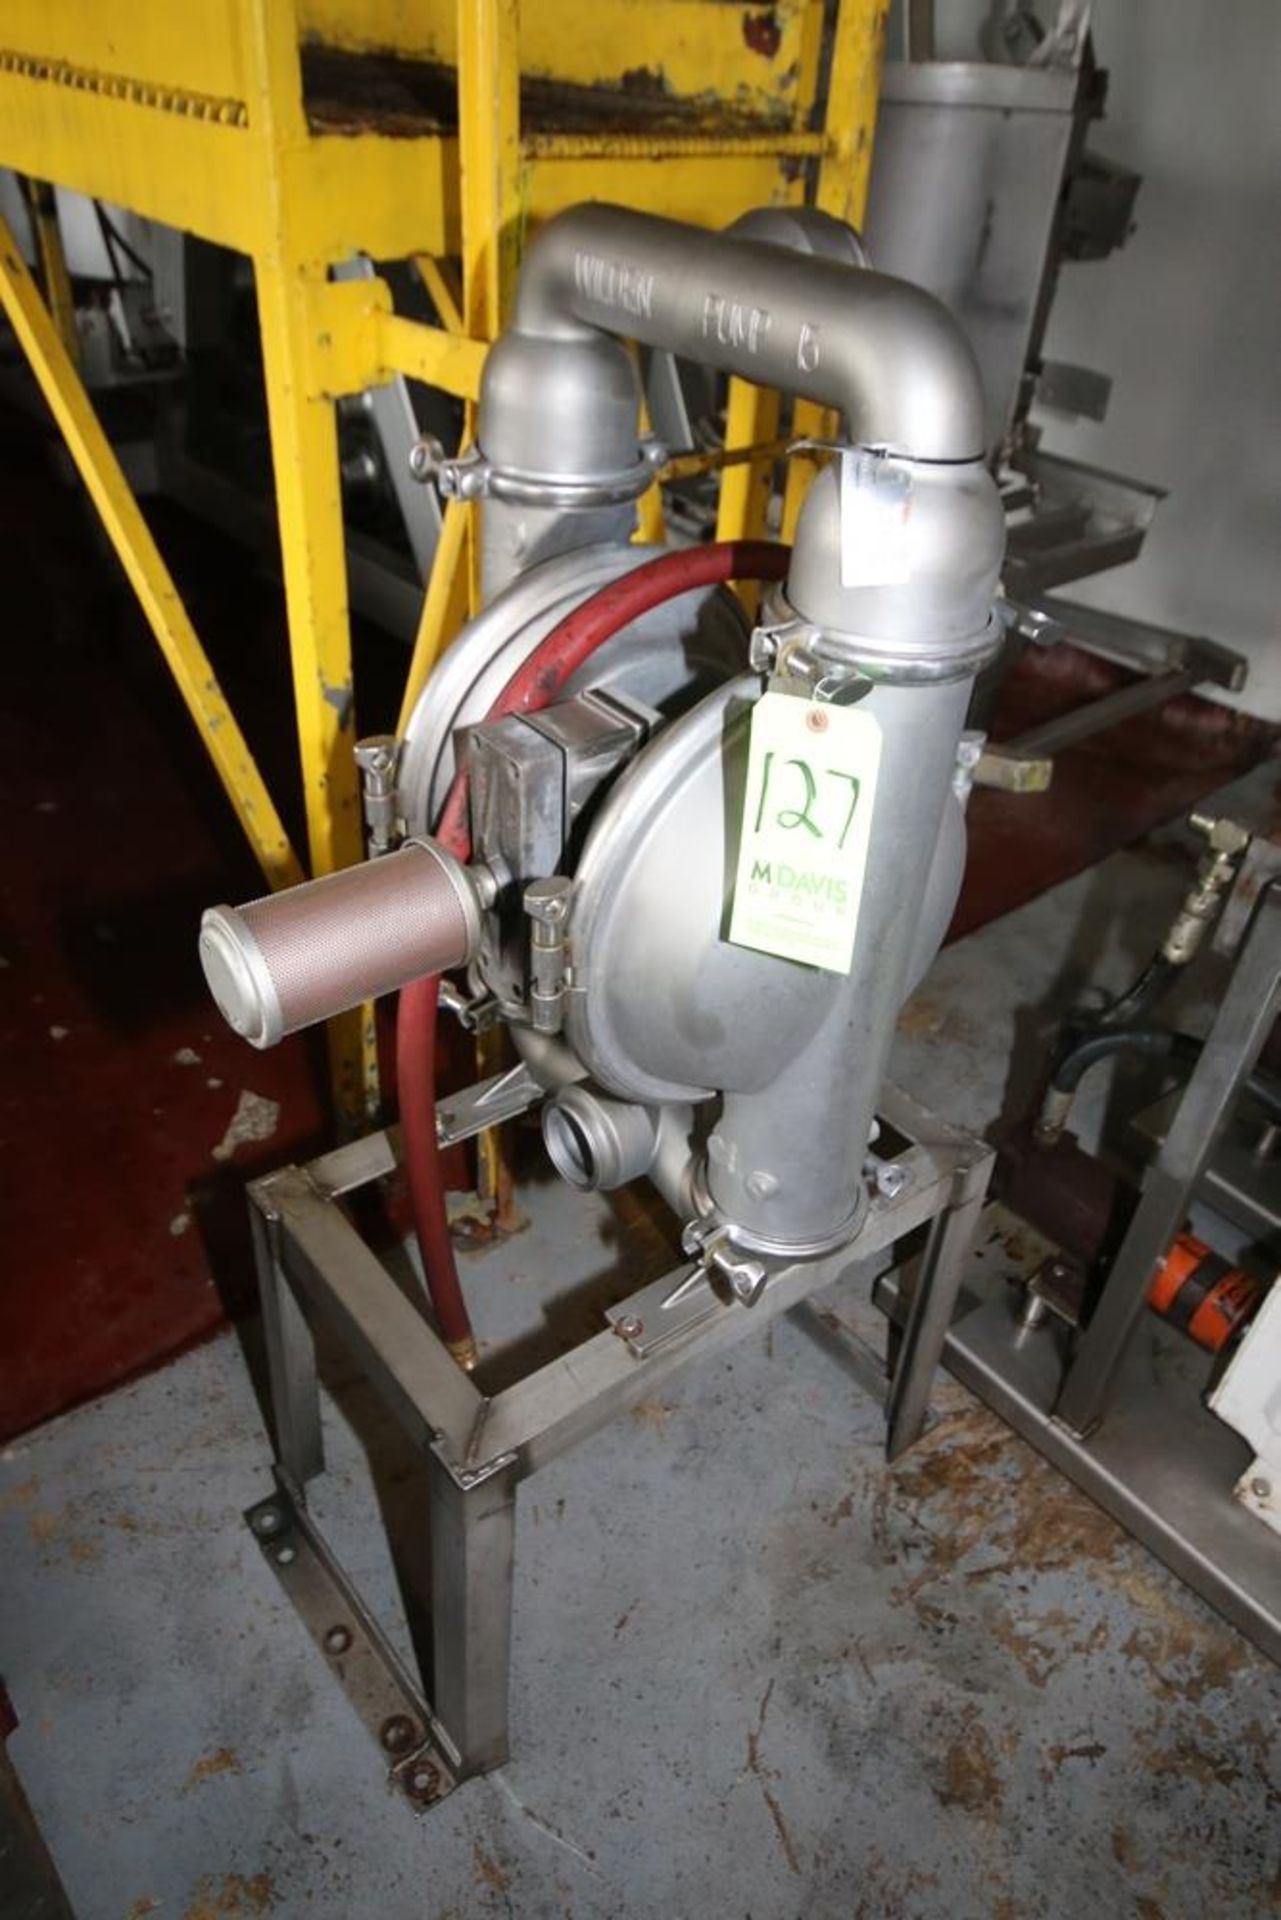 Wilden S/S Diaphragm Pump, M/N 15, with 2-1/2" Clamp Type Inlet/Outlet, Mounted on S/S Frame